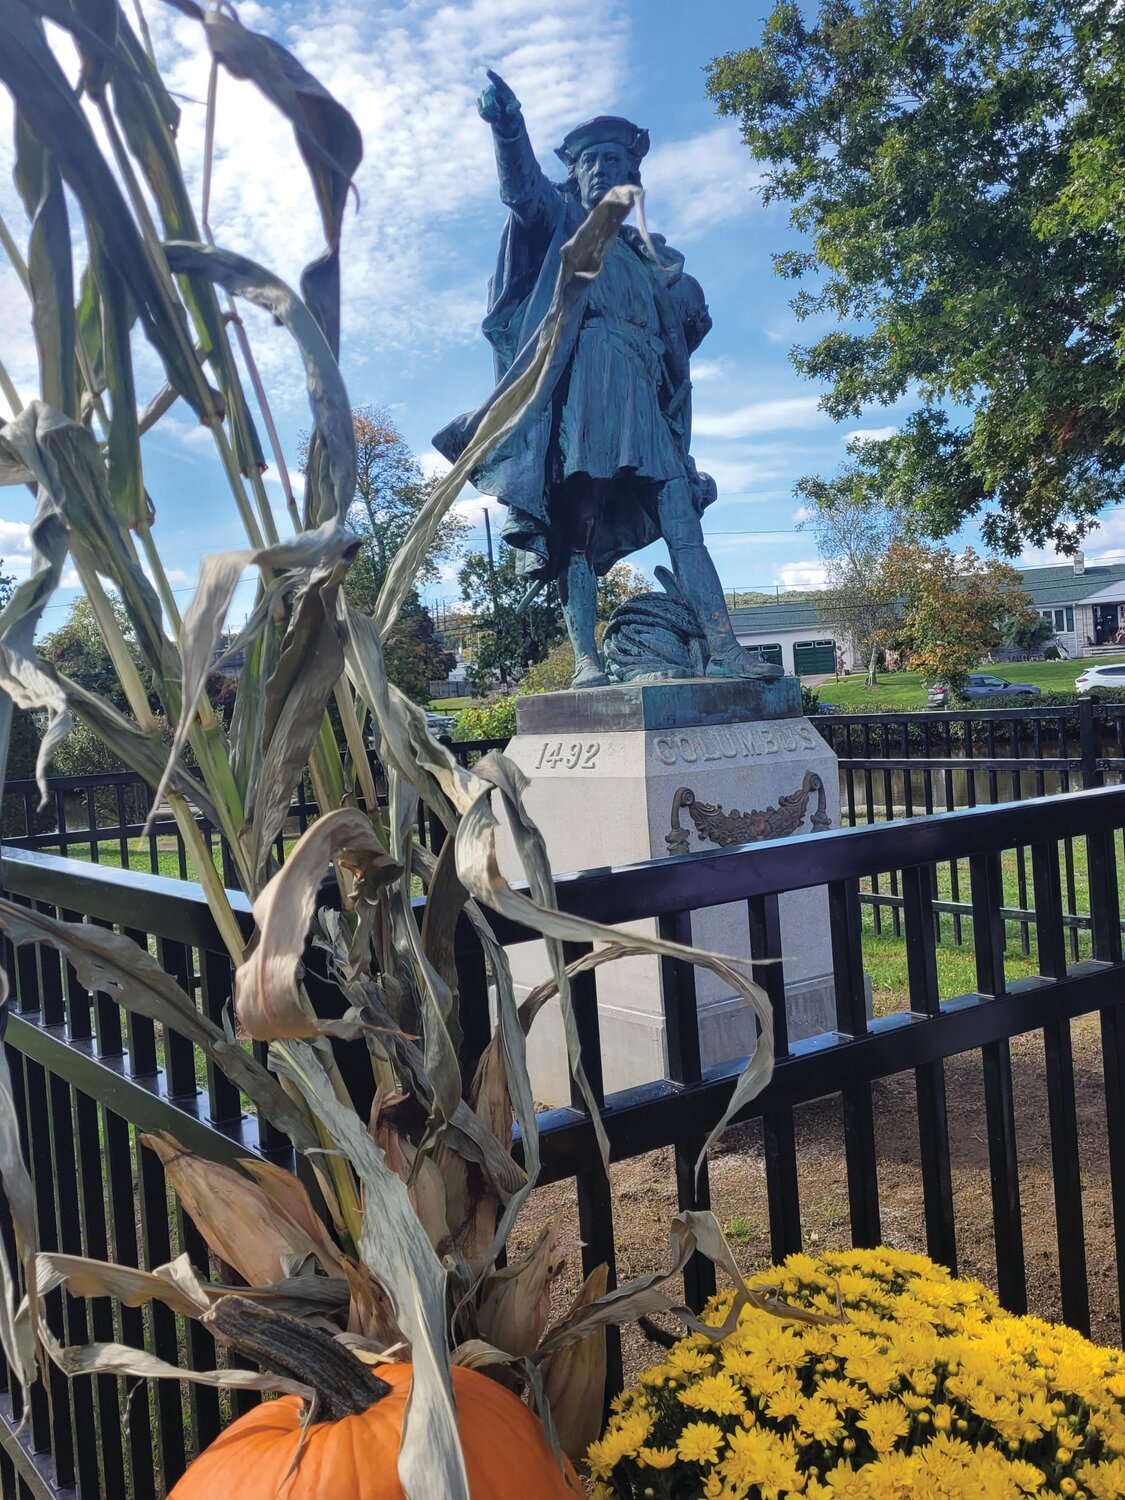 STATUE UNVEILED: The statue lived in Providence for 130 years. It was vandalized and removed and sat in storage before it was erected in Johnston’s War Memorial Park. On Monday, Columbus Day, the historic Christopher Columbus statue was unveiled to the public.